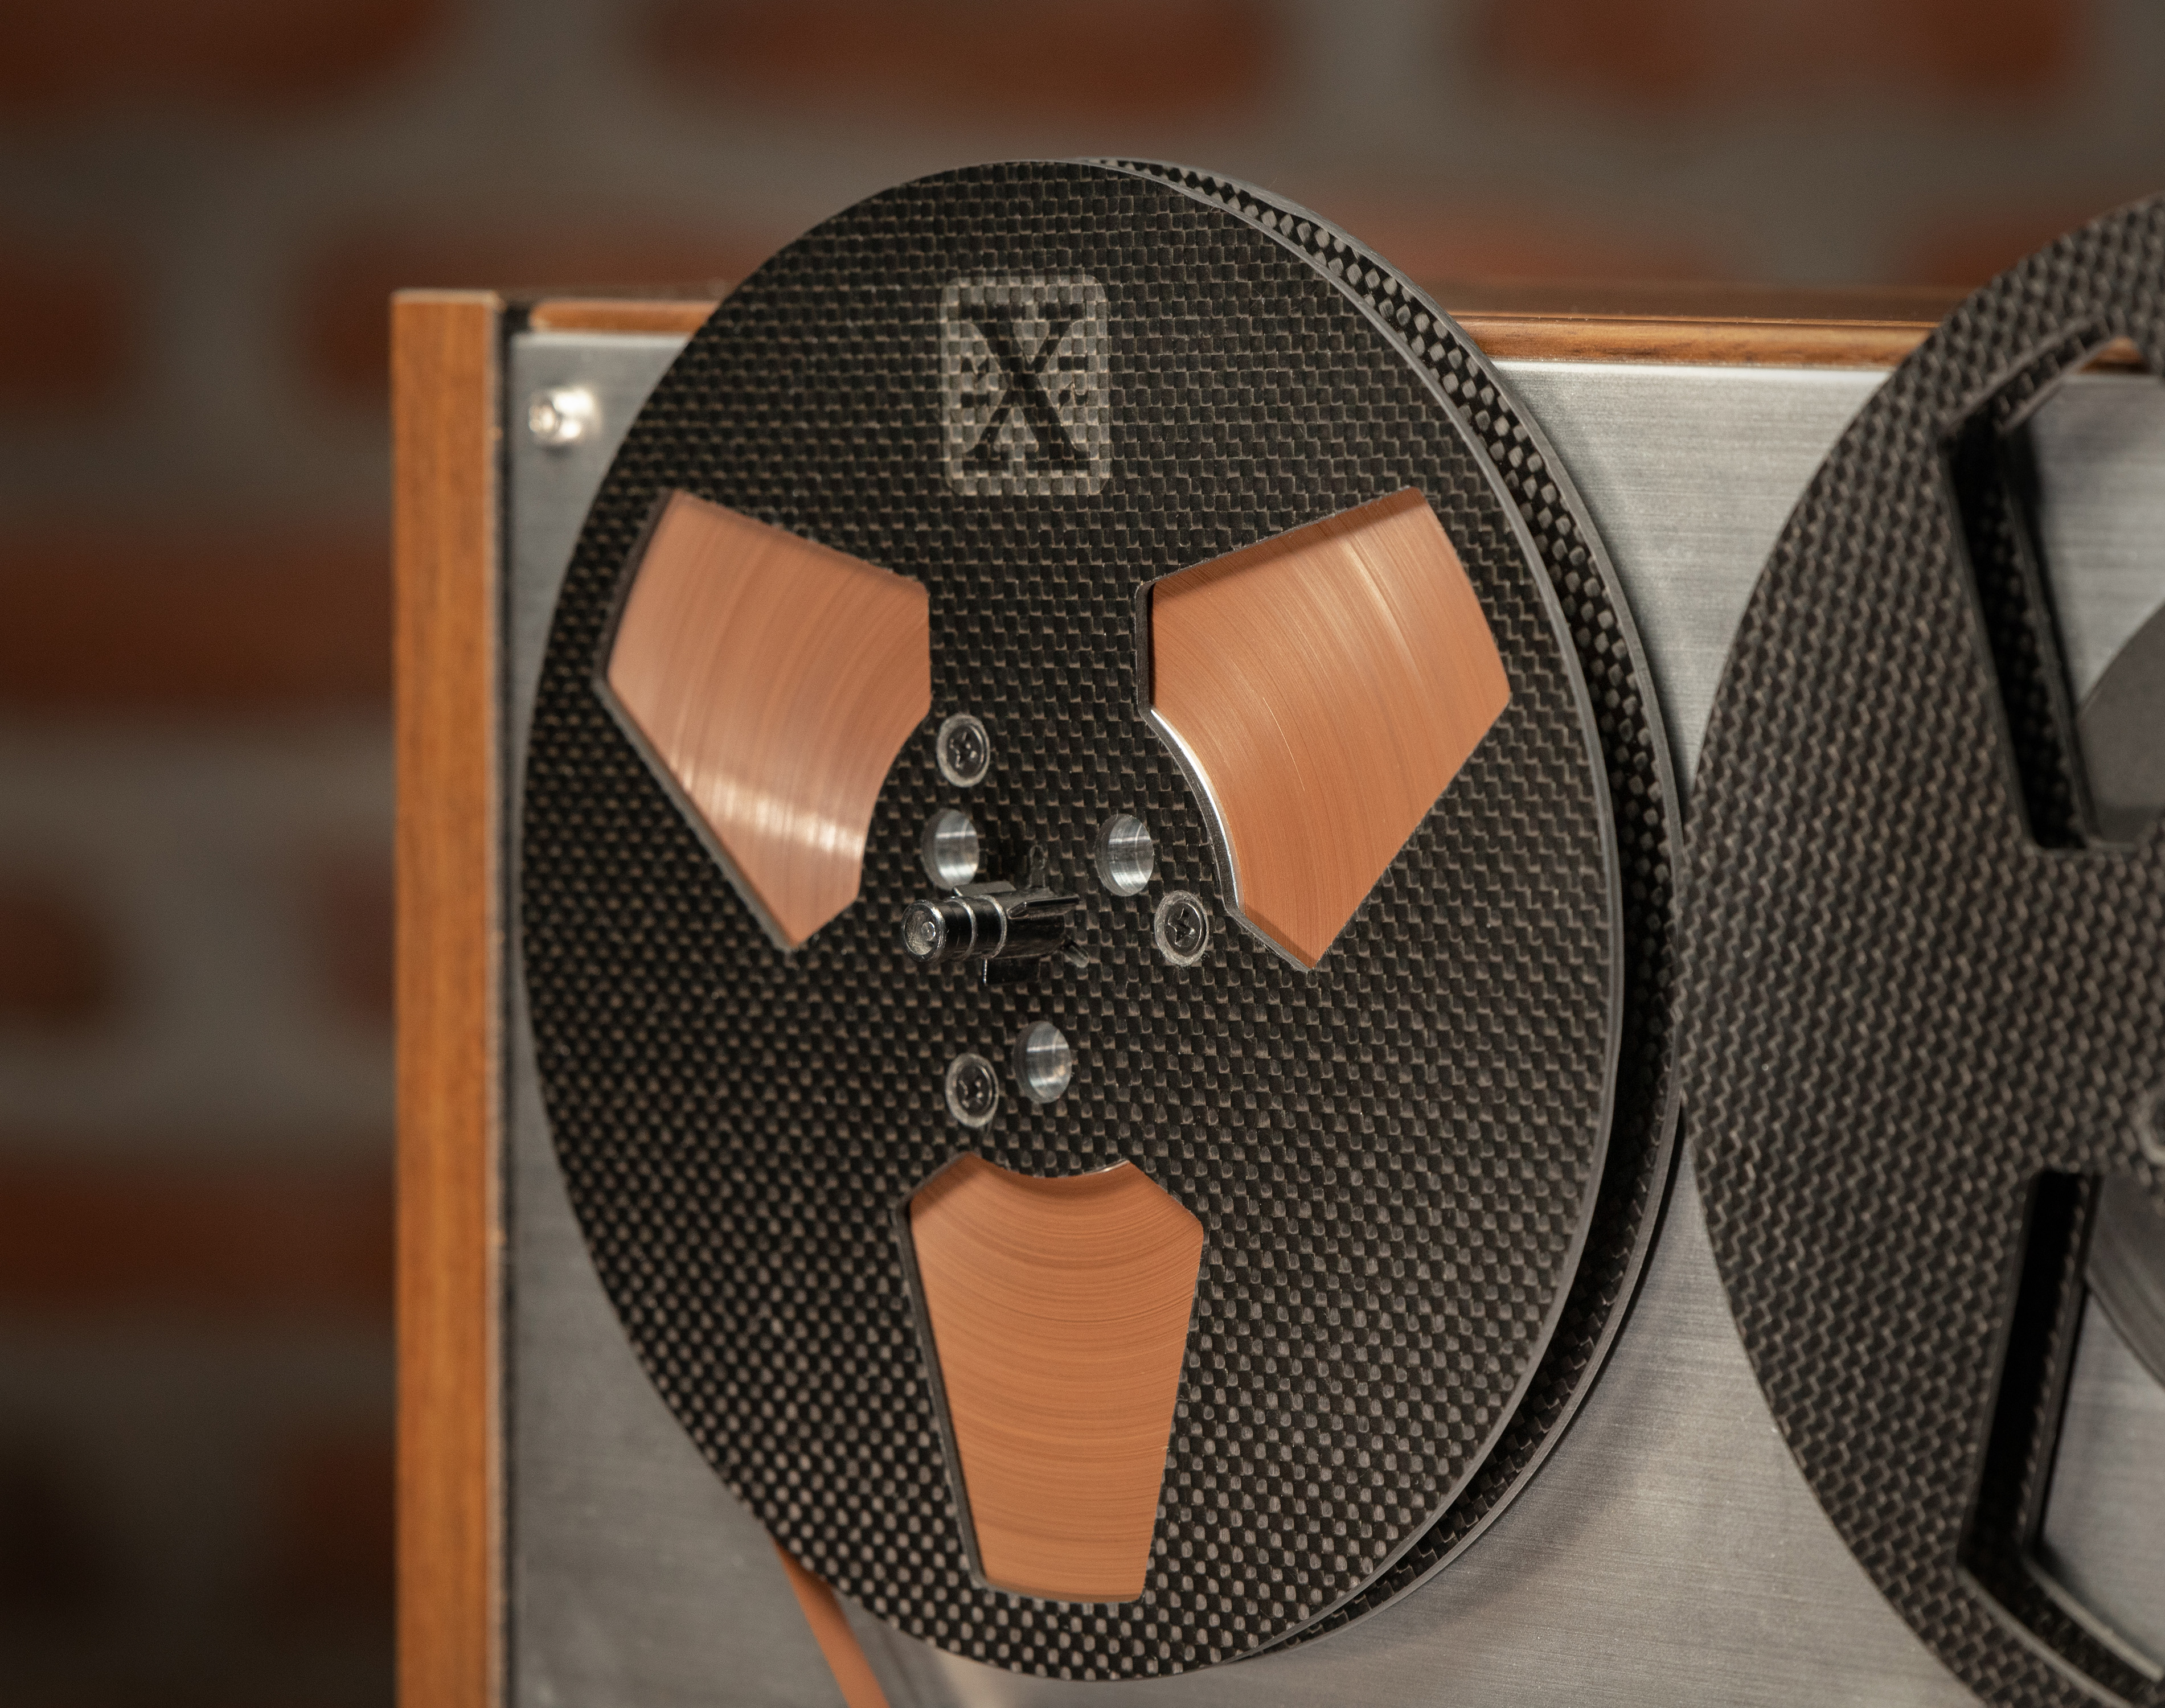 New 7-inch carbon fibre high performance tape reel from RX Reels – Dave  Denyer: The Reel-to-Reel Rambler